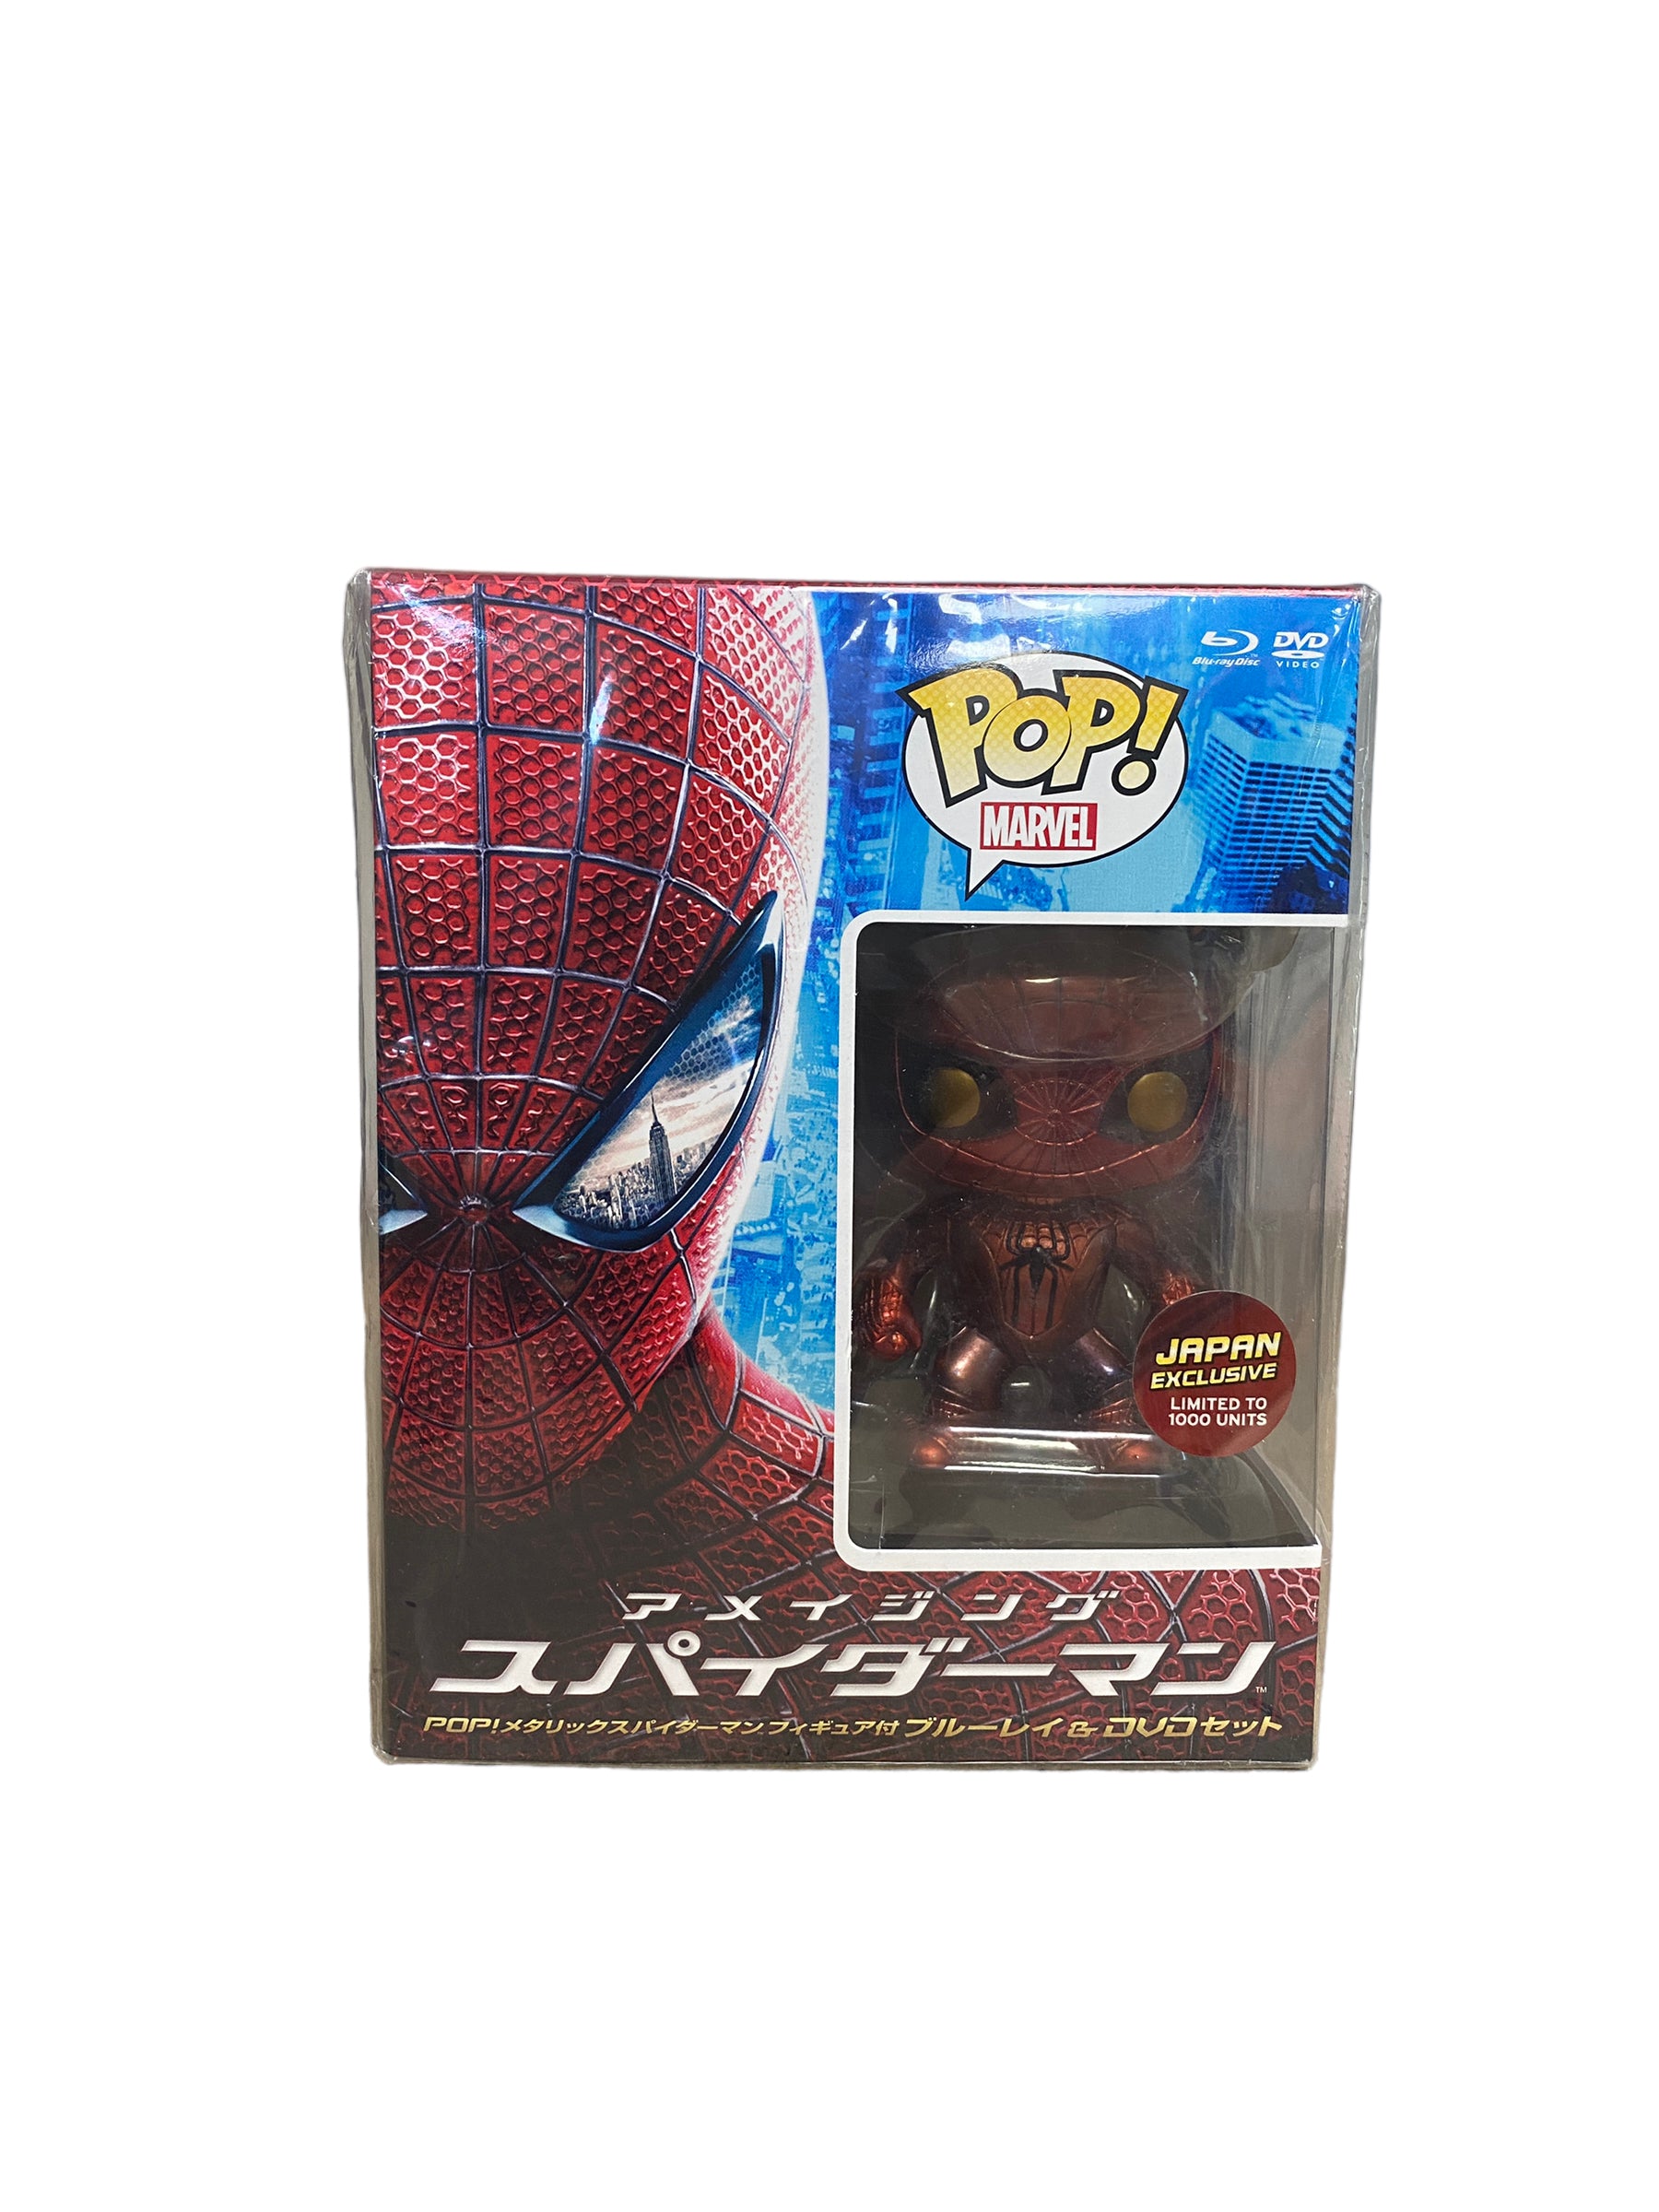 The Amazing Spider-Man (Metallic) Blu-ray Funko Pop Bundle - Marvel - Sealed - Japan Exclusive LE1000 Units - Condition 9/10